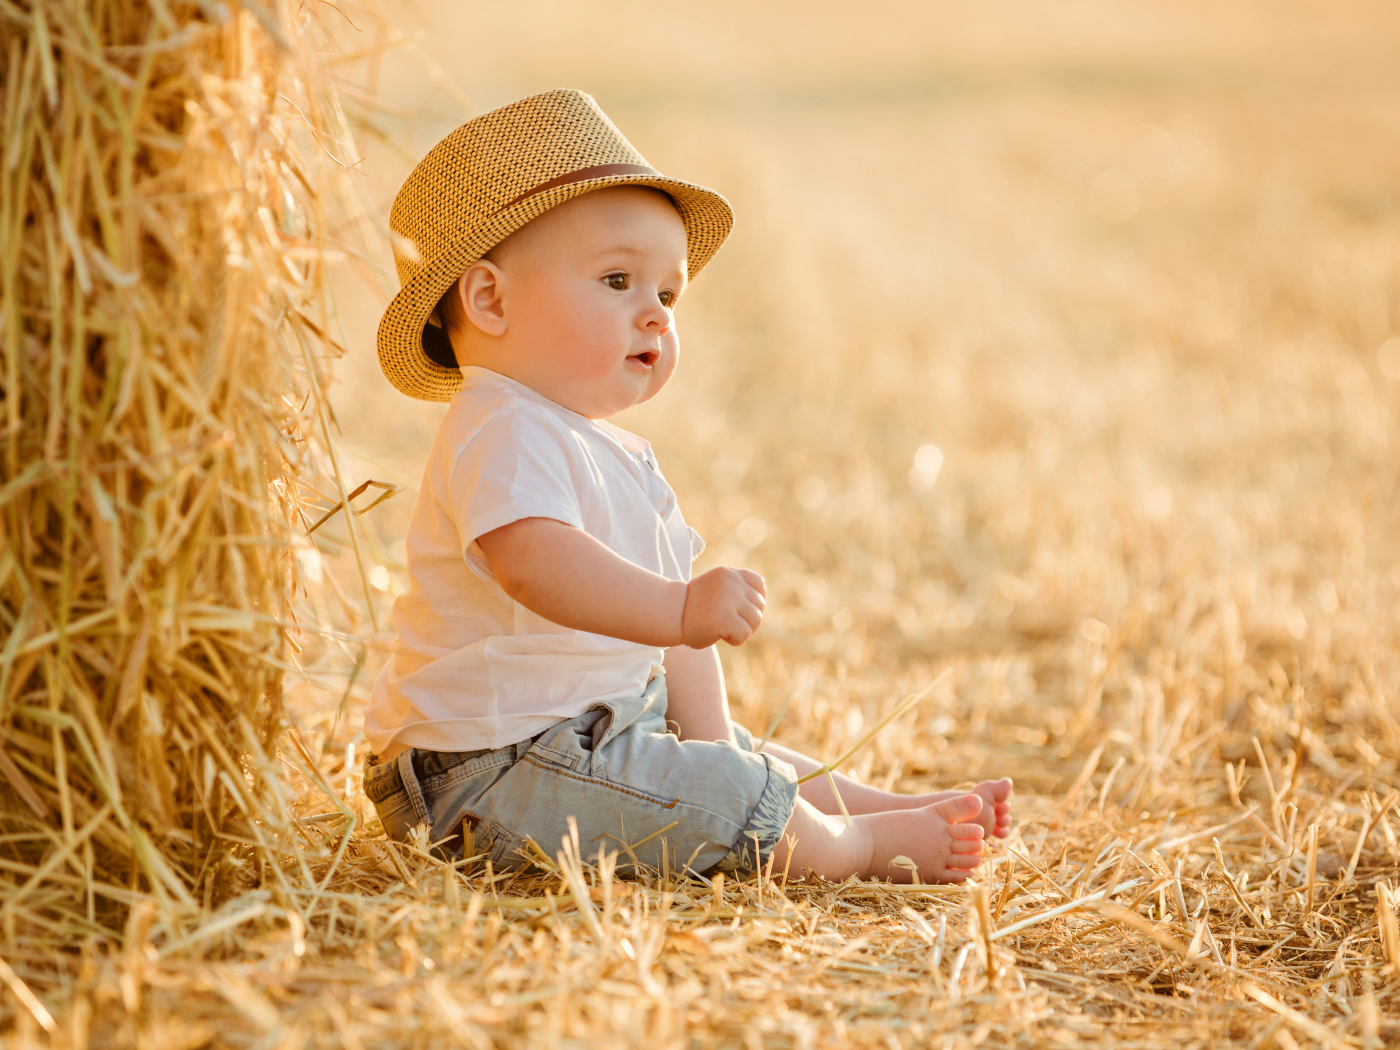 A little boy is sitting on the hay